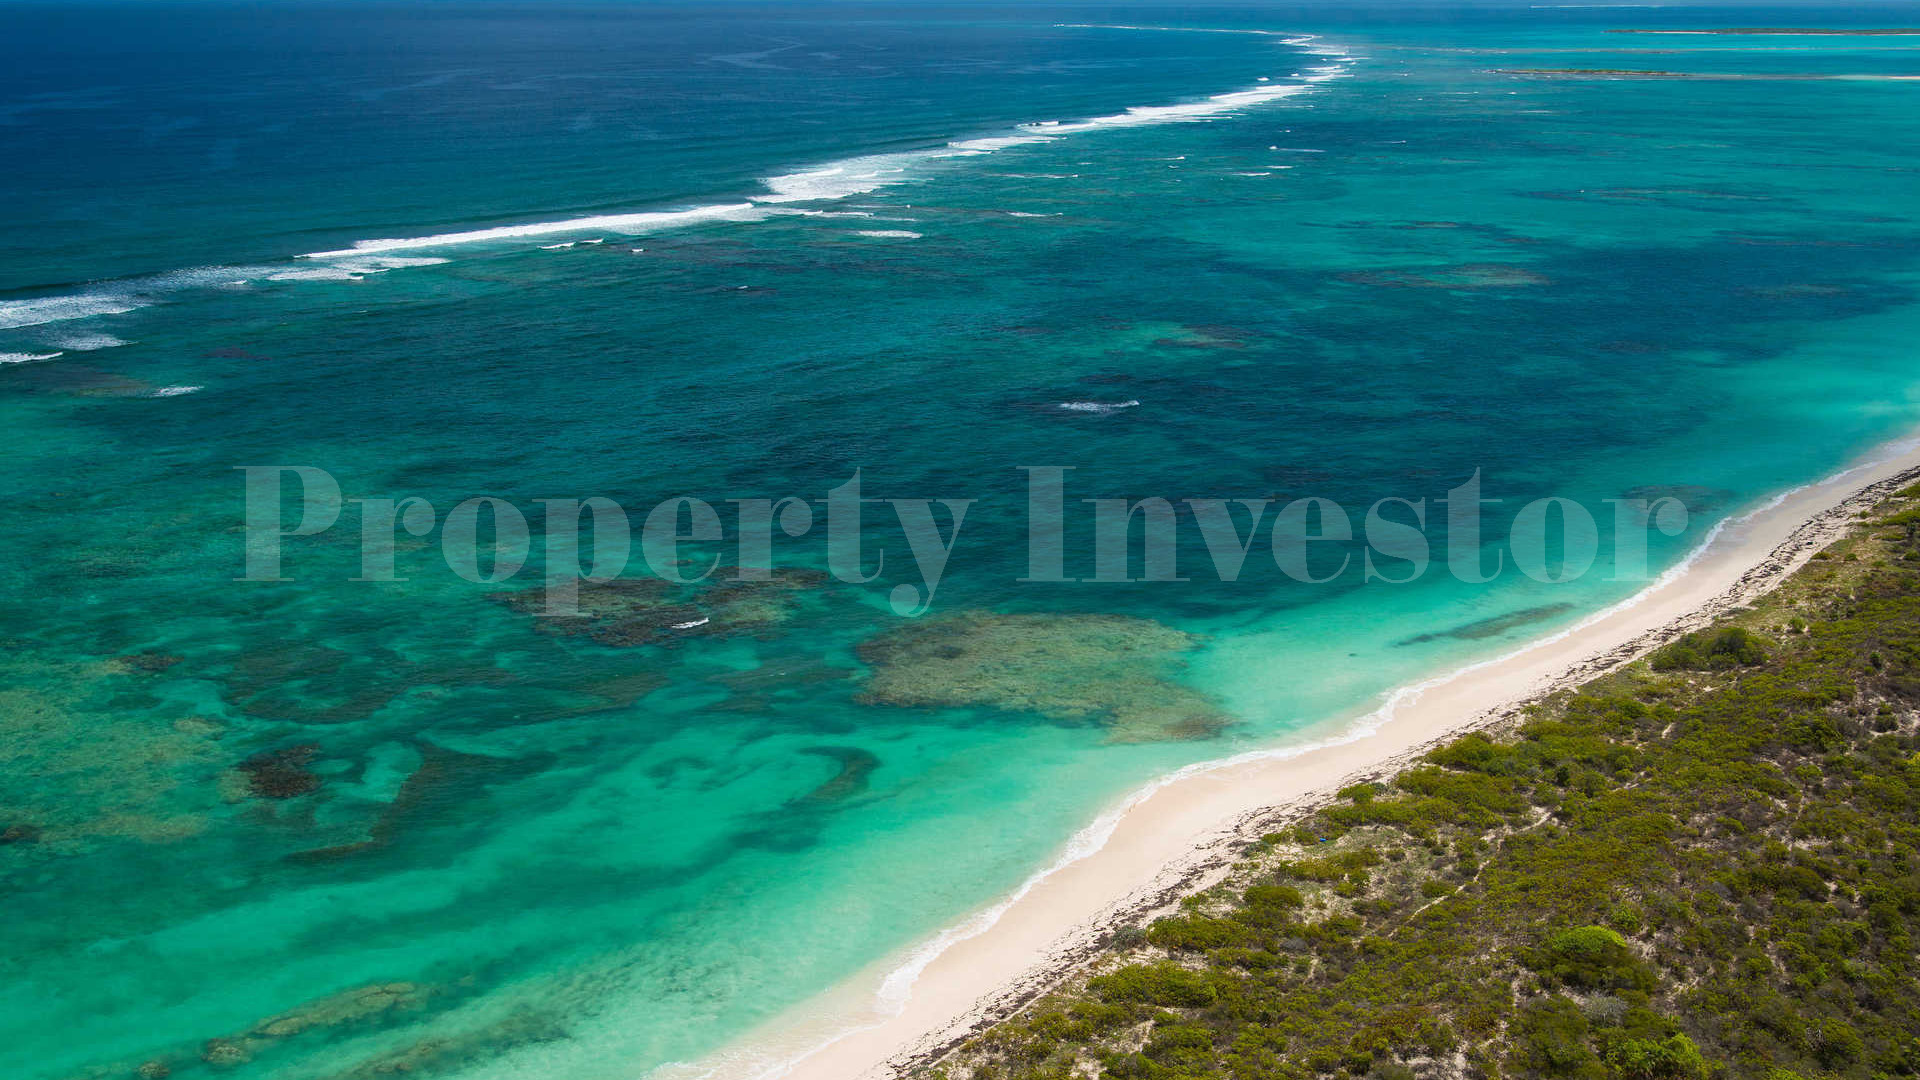 Second Large 215 Hectare Lot for Commercial Development in East Caicos (Lot 1B)